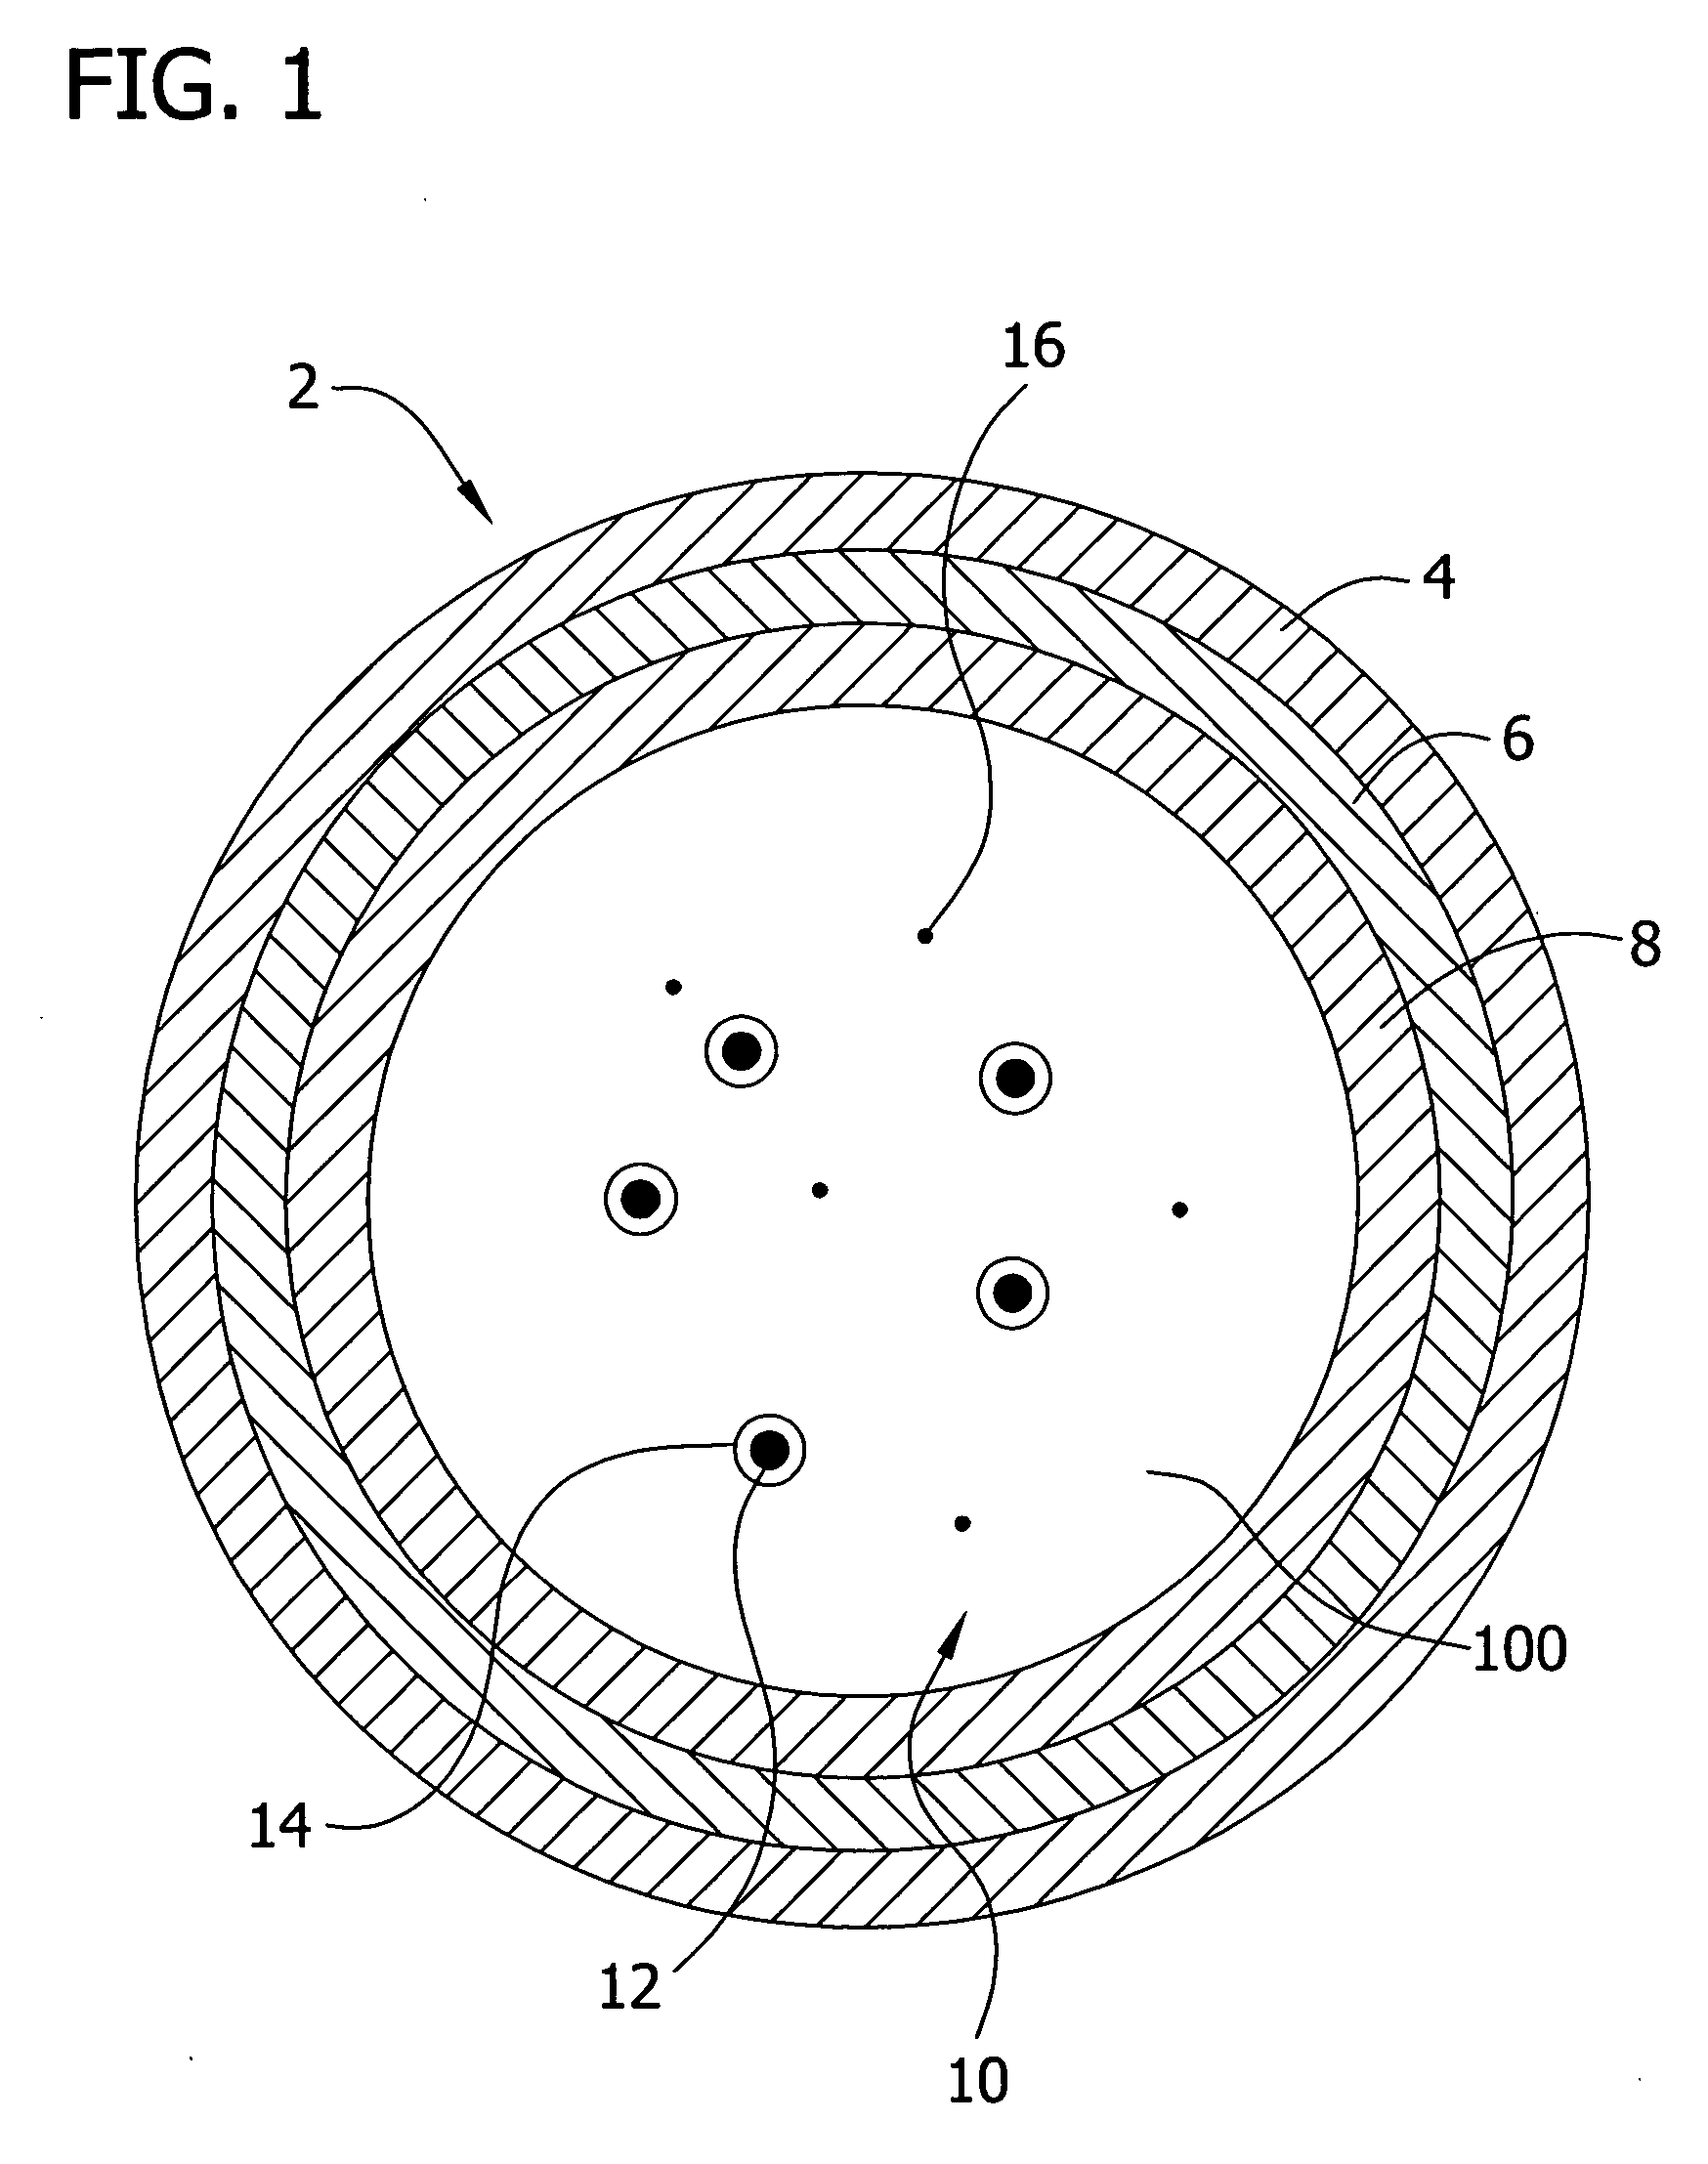 Microencapsulated delivery vehicles including cooling agents